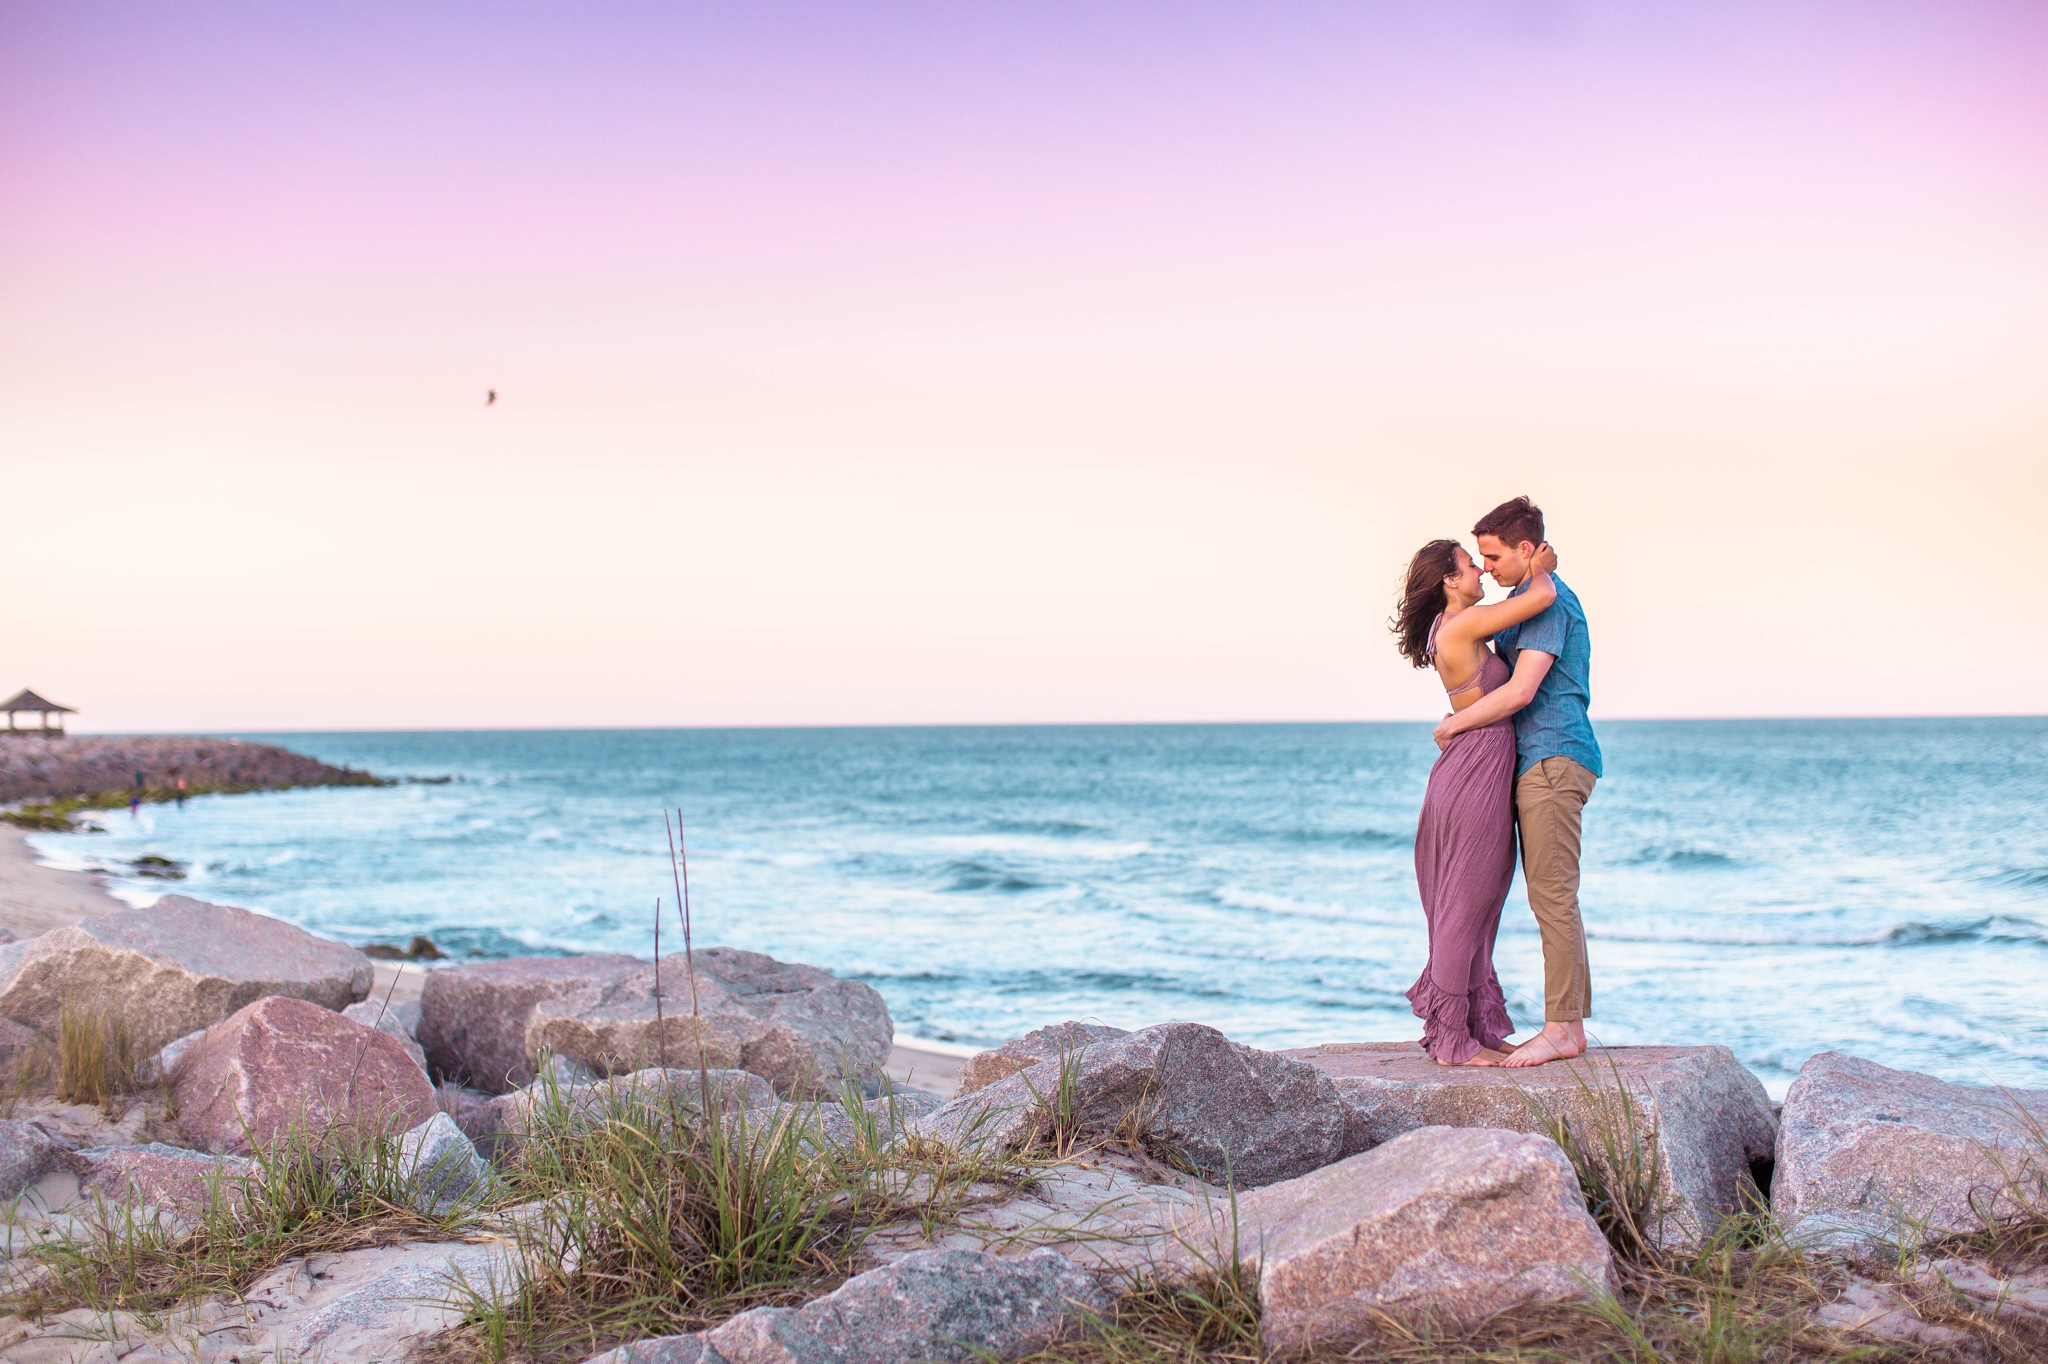  Couple kissing on the cliffs at sunset - Woman is in a flowy pastel maxi dress - candid and unposed golden light session - beach engagement photographer in honolulu, oahu, hawaii - johanna dye photography 